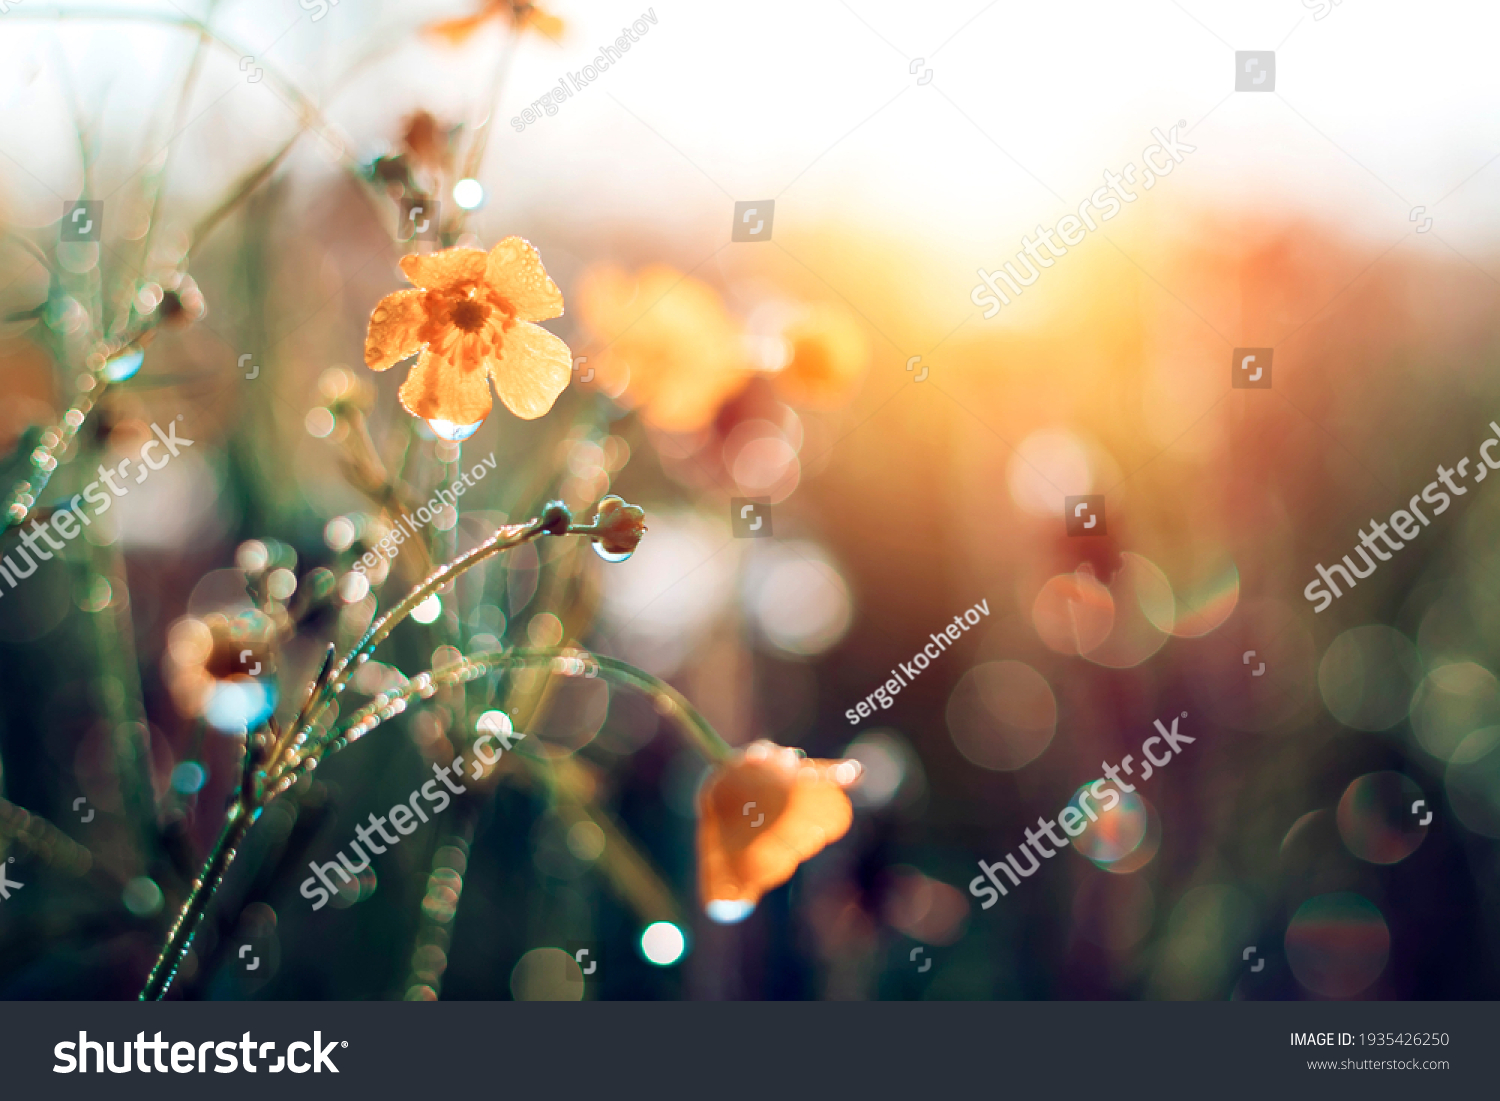 Morning summer or spring. Beautiful wildflowers with dew drops at dawn, light blur, selective focus. Shallow depth of field. #1935426250